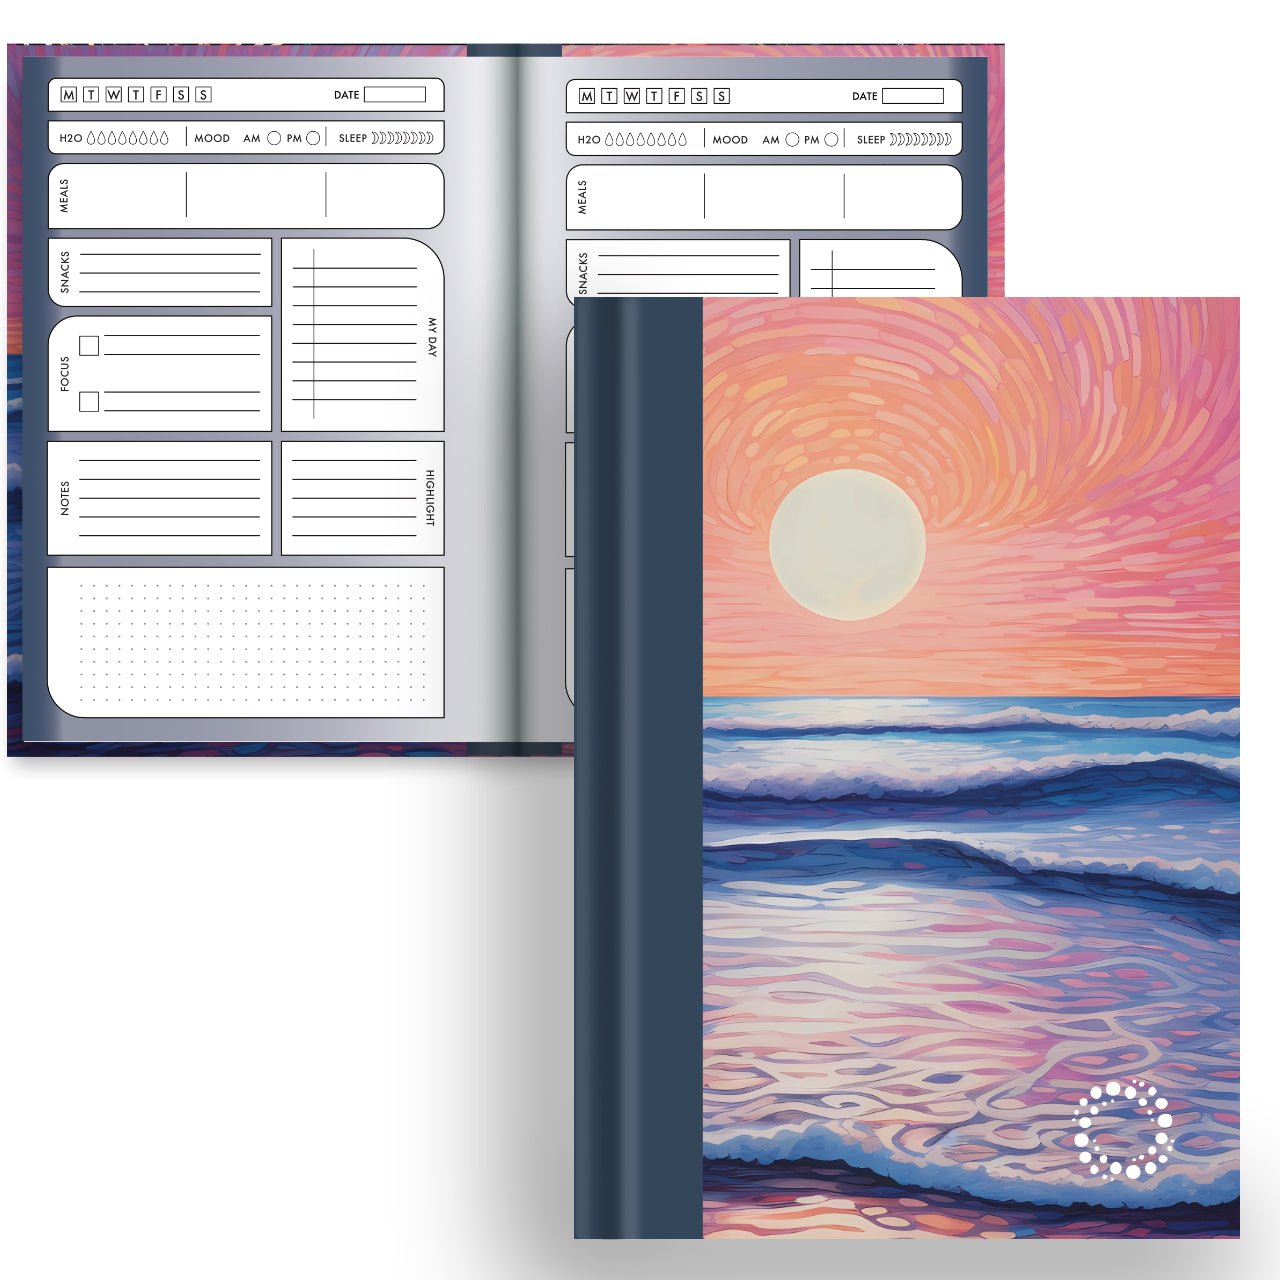 Tidal planner and dot grid notebook open to reveal interior design